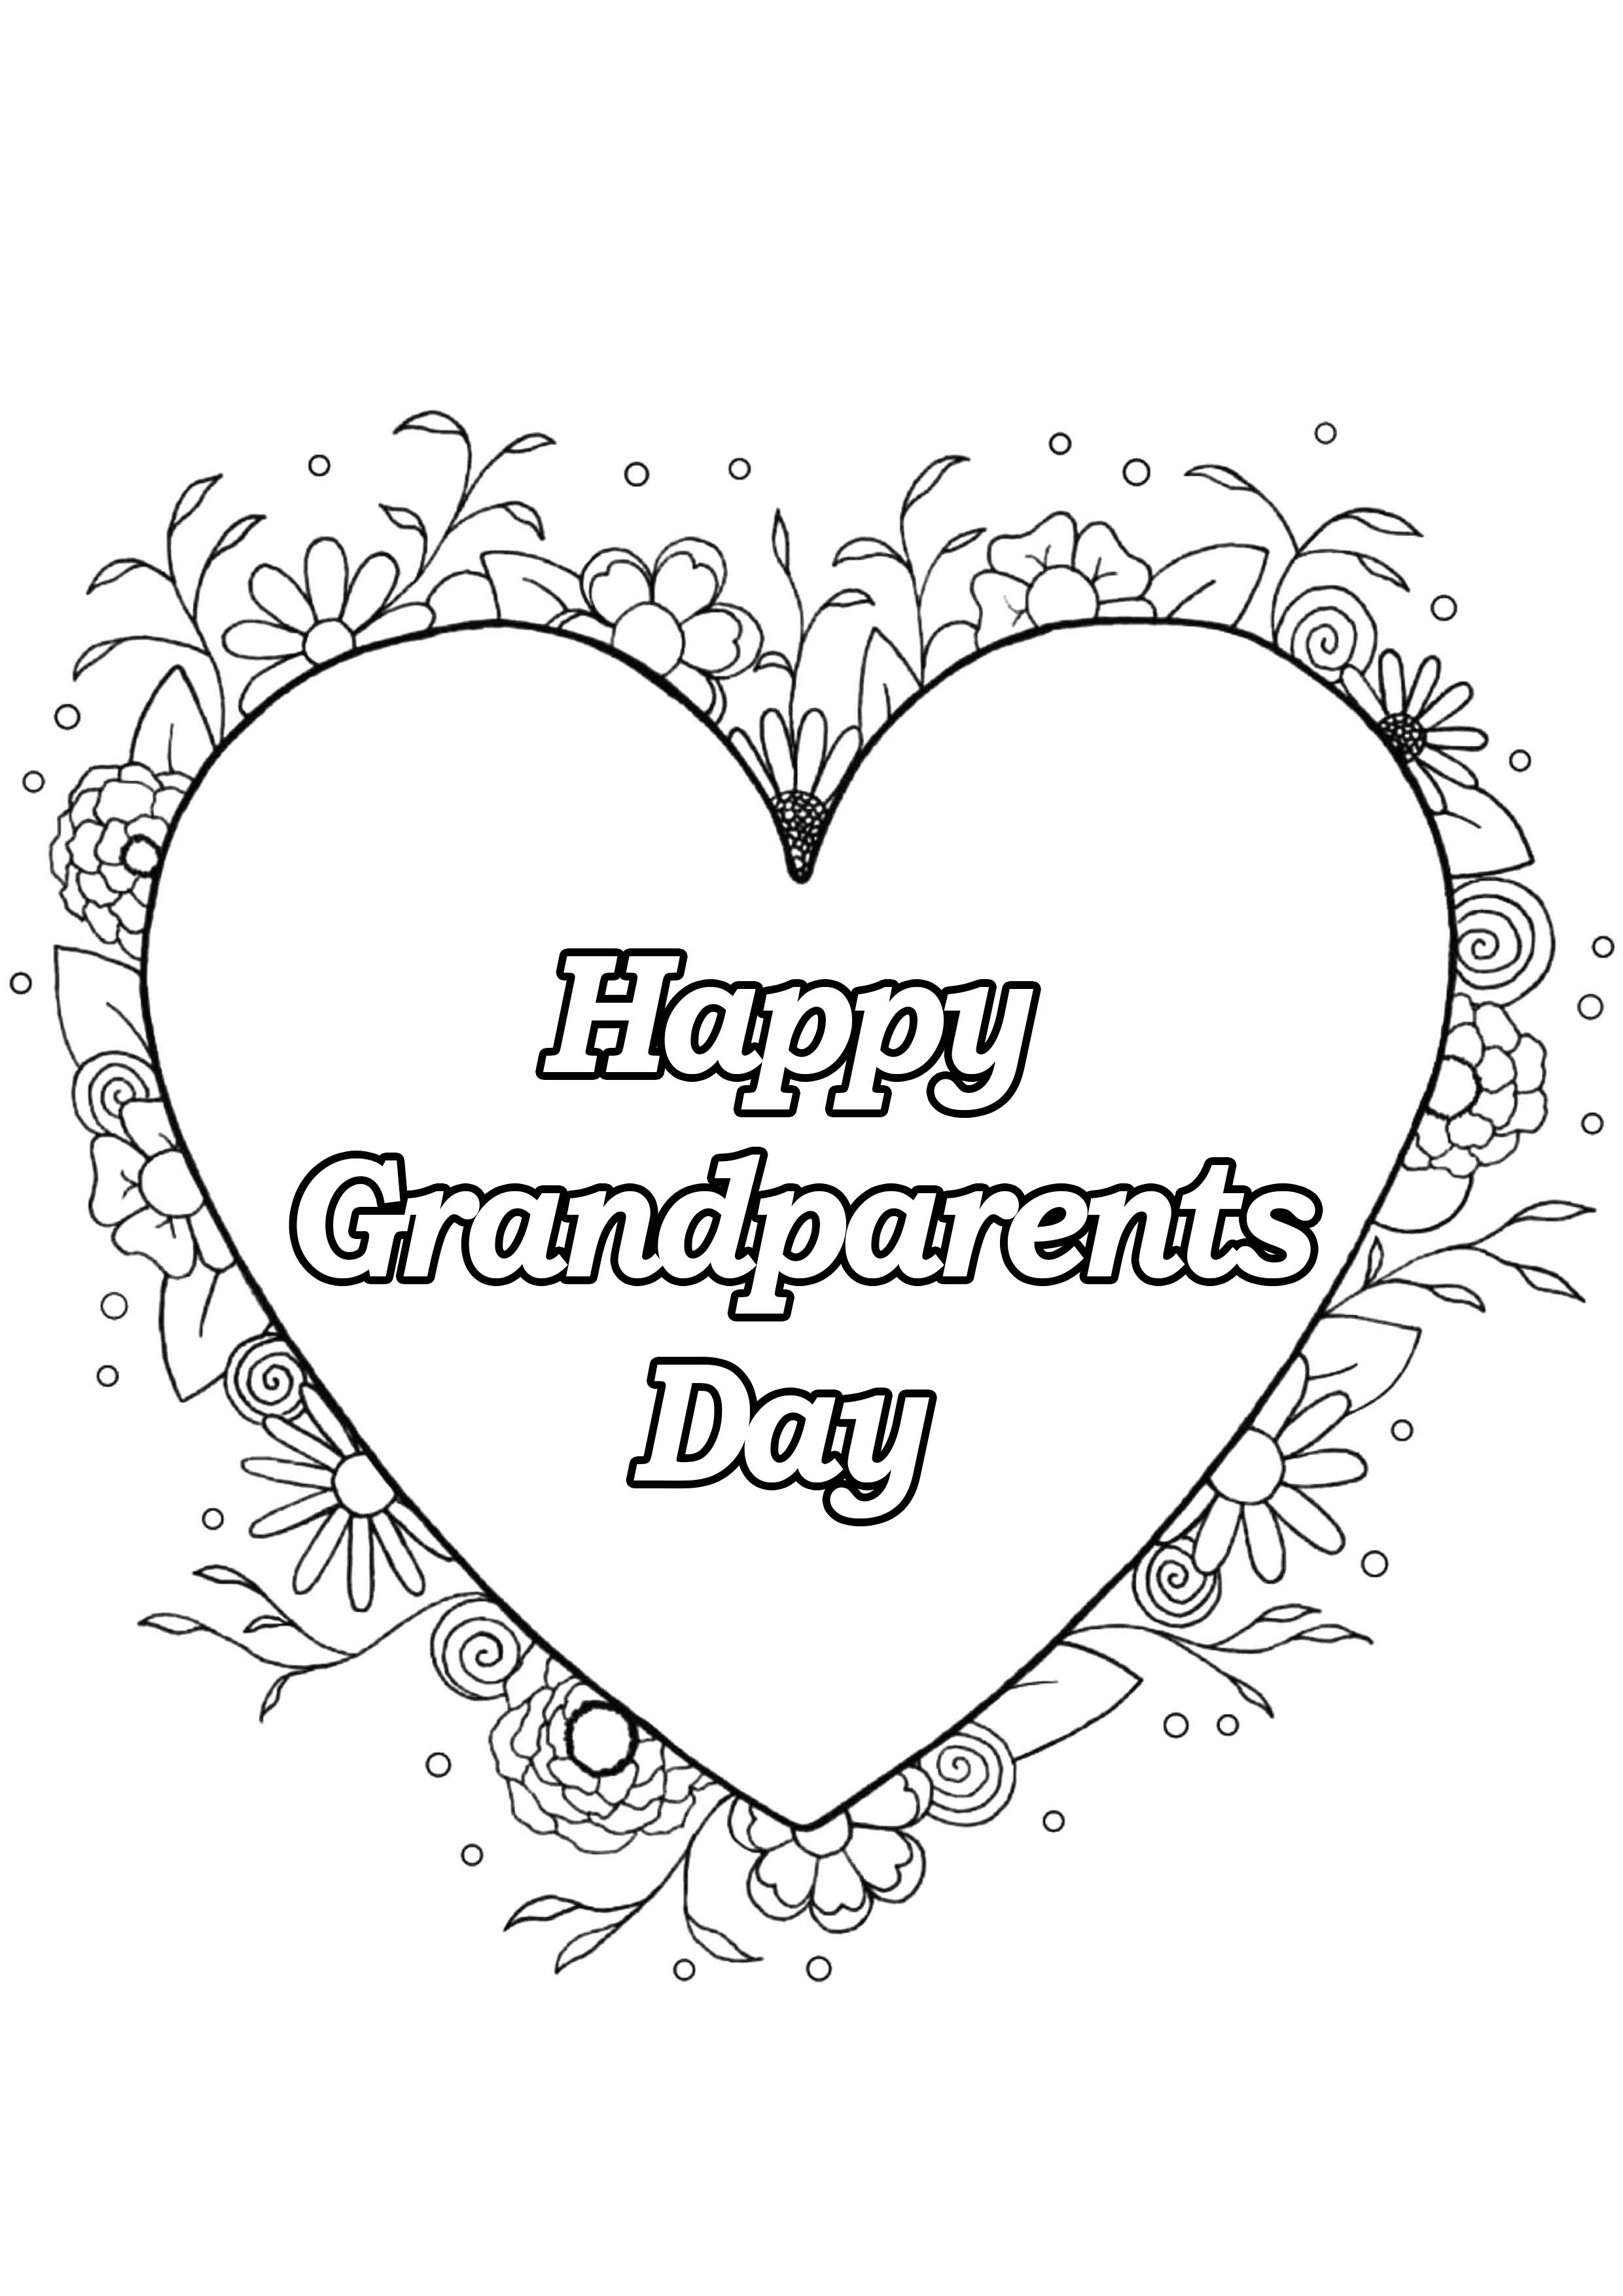 Grandparents day coloring page : Heart & Flowers